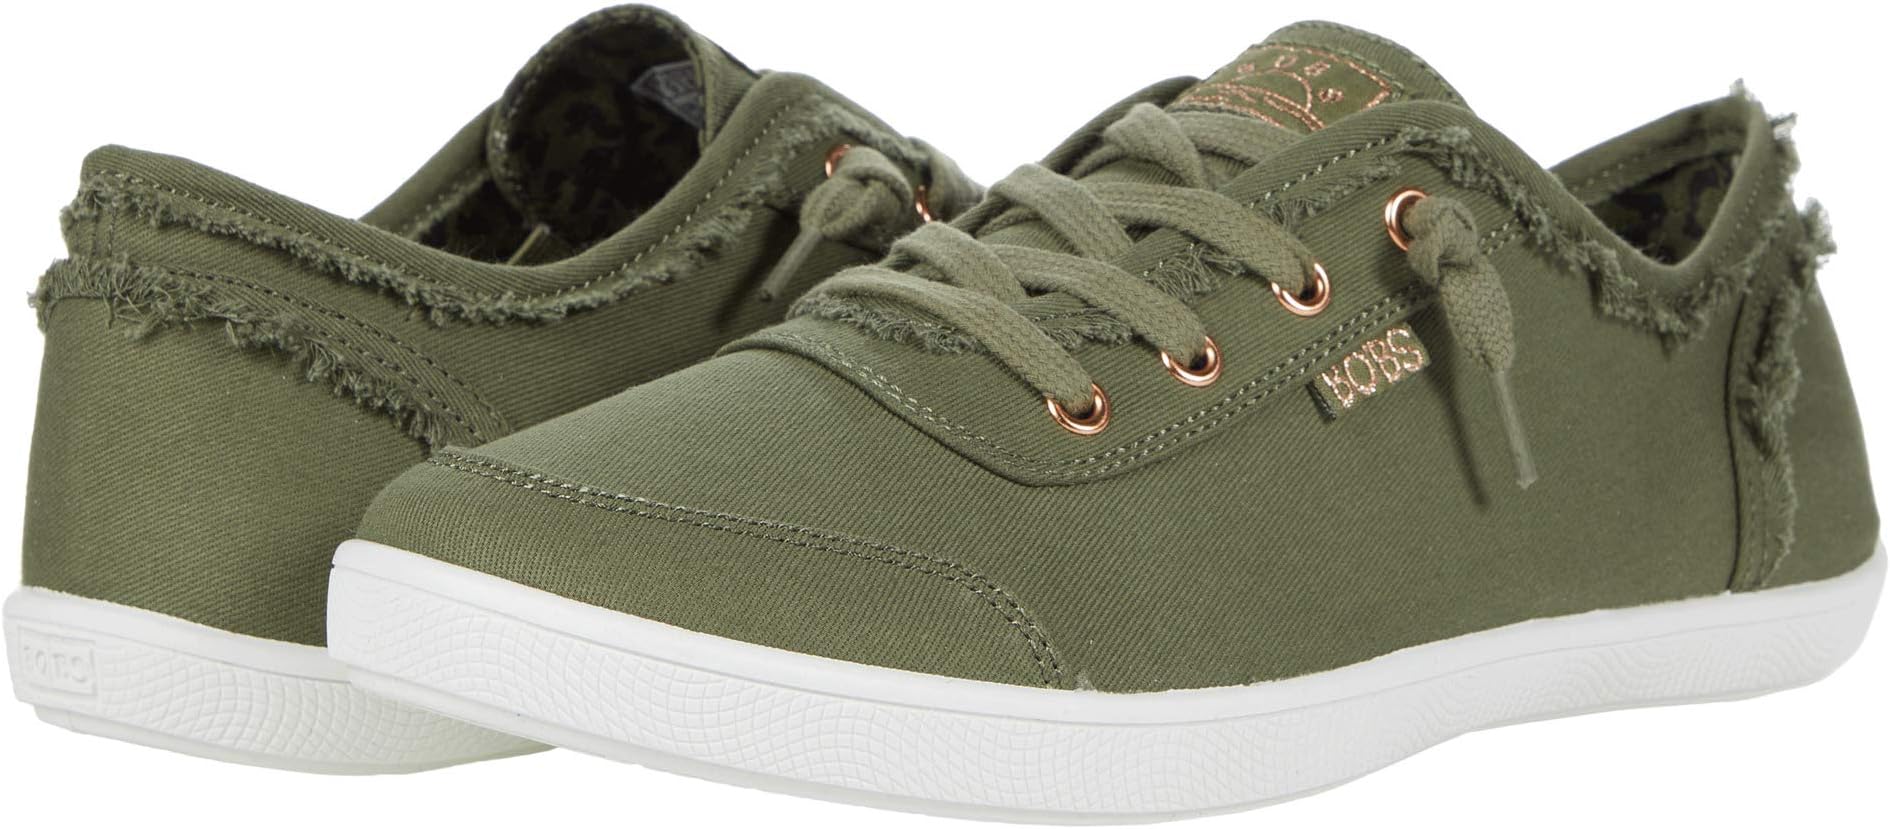 Кроссовки Bobs B Cute BOBS from SKECHERS, цвет Olive